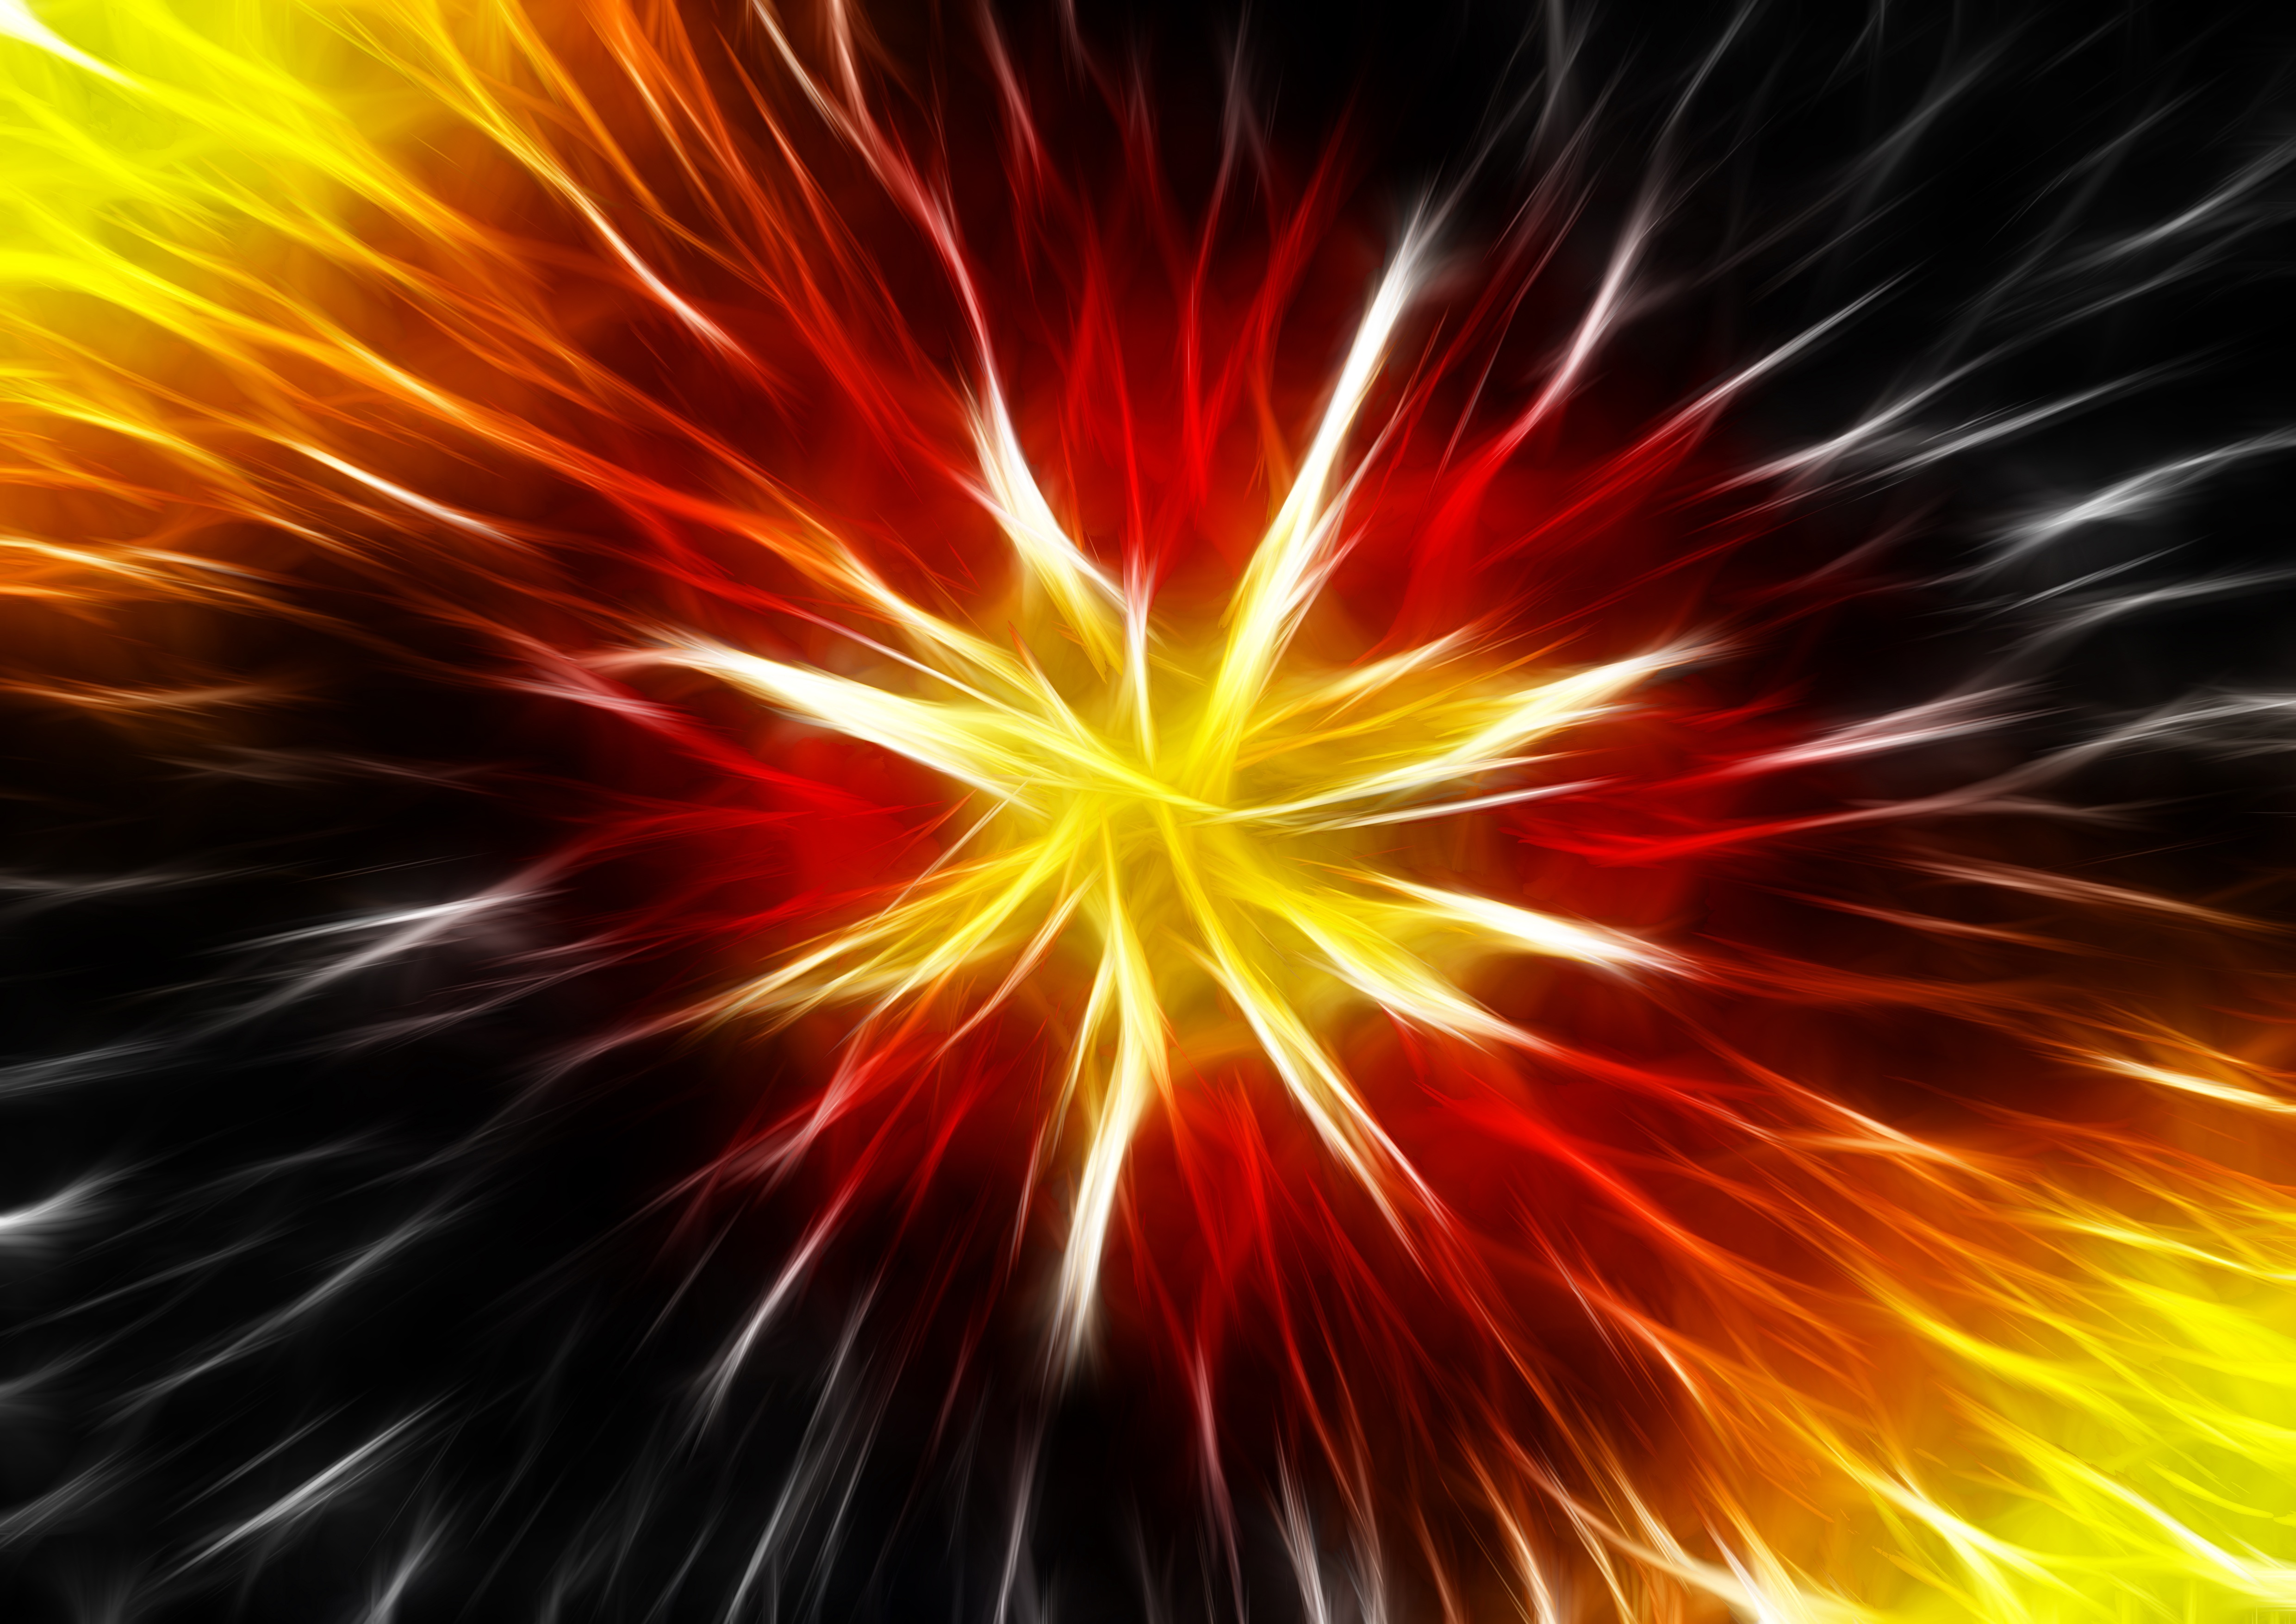 Abstract Star Explosion Wallpaper Image